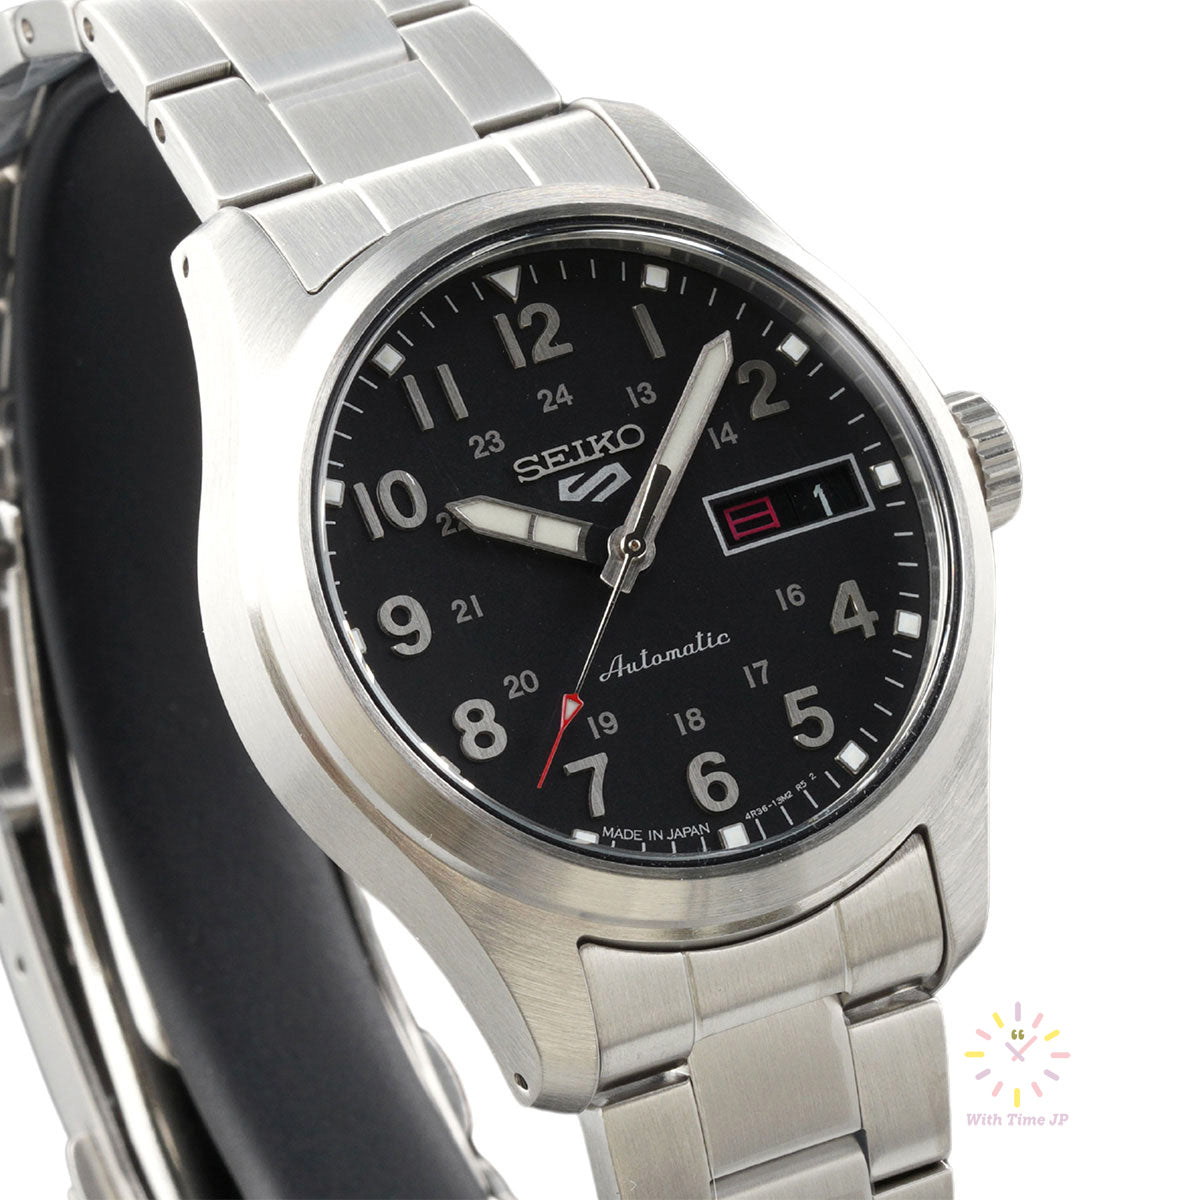 Seiko 5 Sports Day Date Automatic SBSA197 – With Time JP